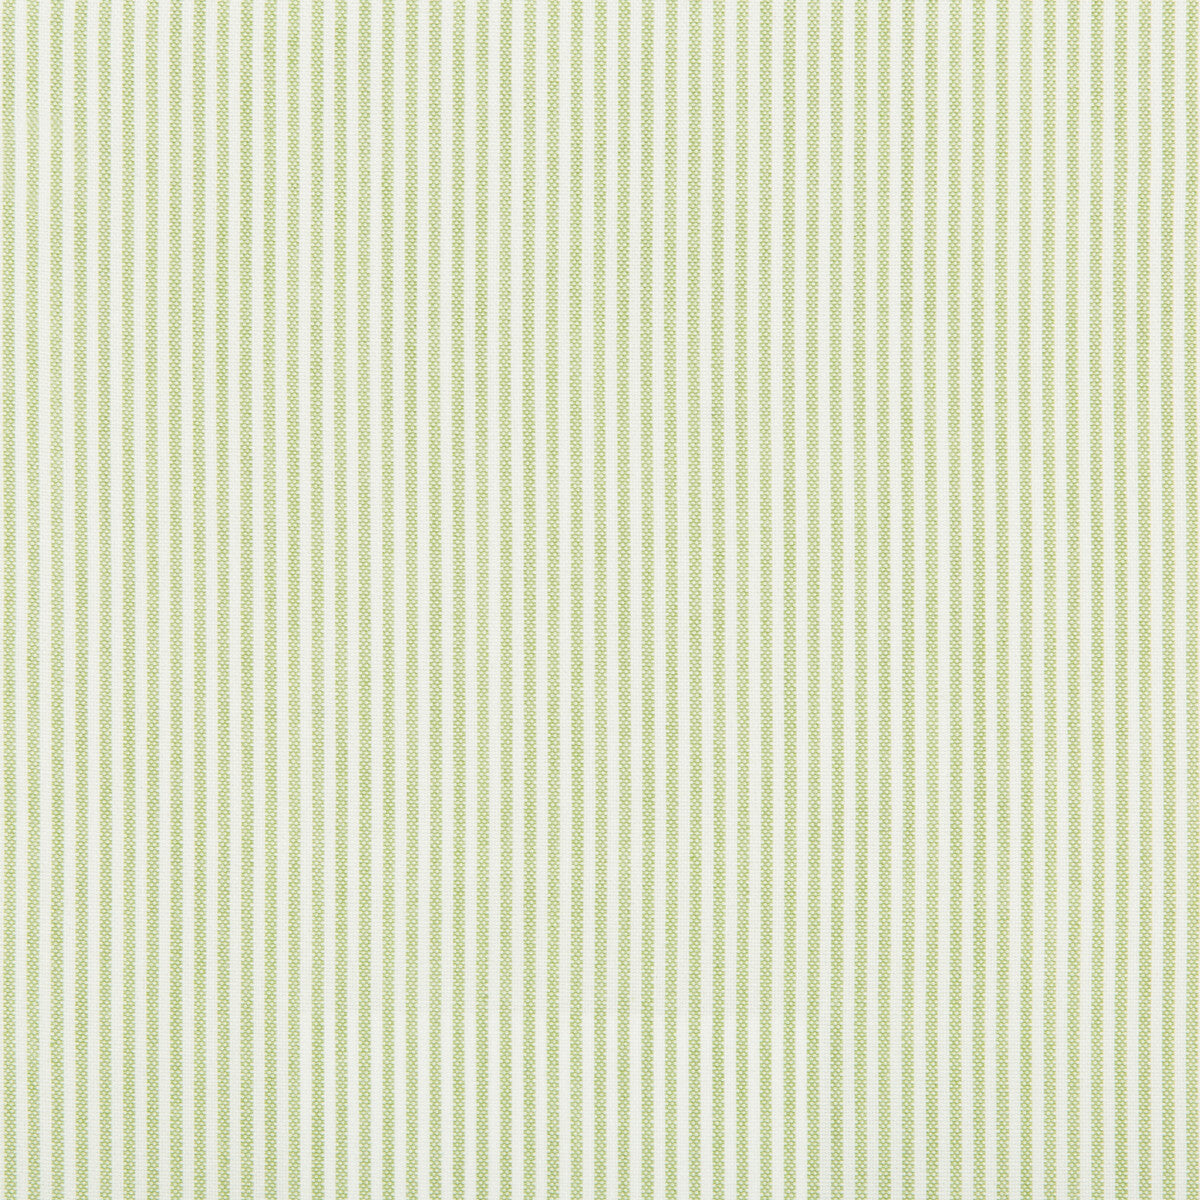 Kravet Basics fabric in 35374-3 color - pattern 35374.3.0 - by Kravet Basics in the Performance Indoor Outdoor collection